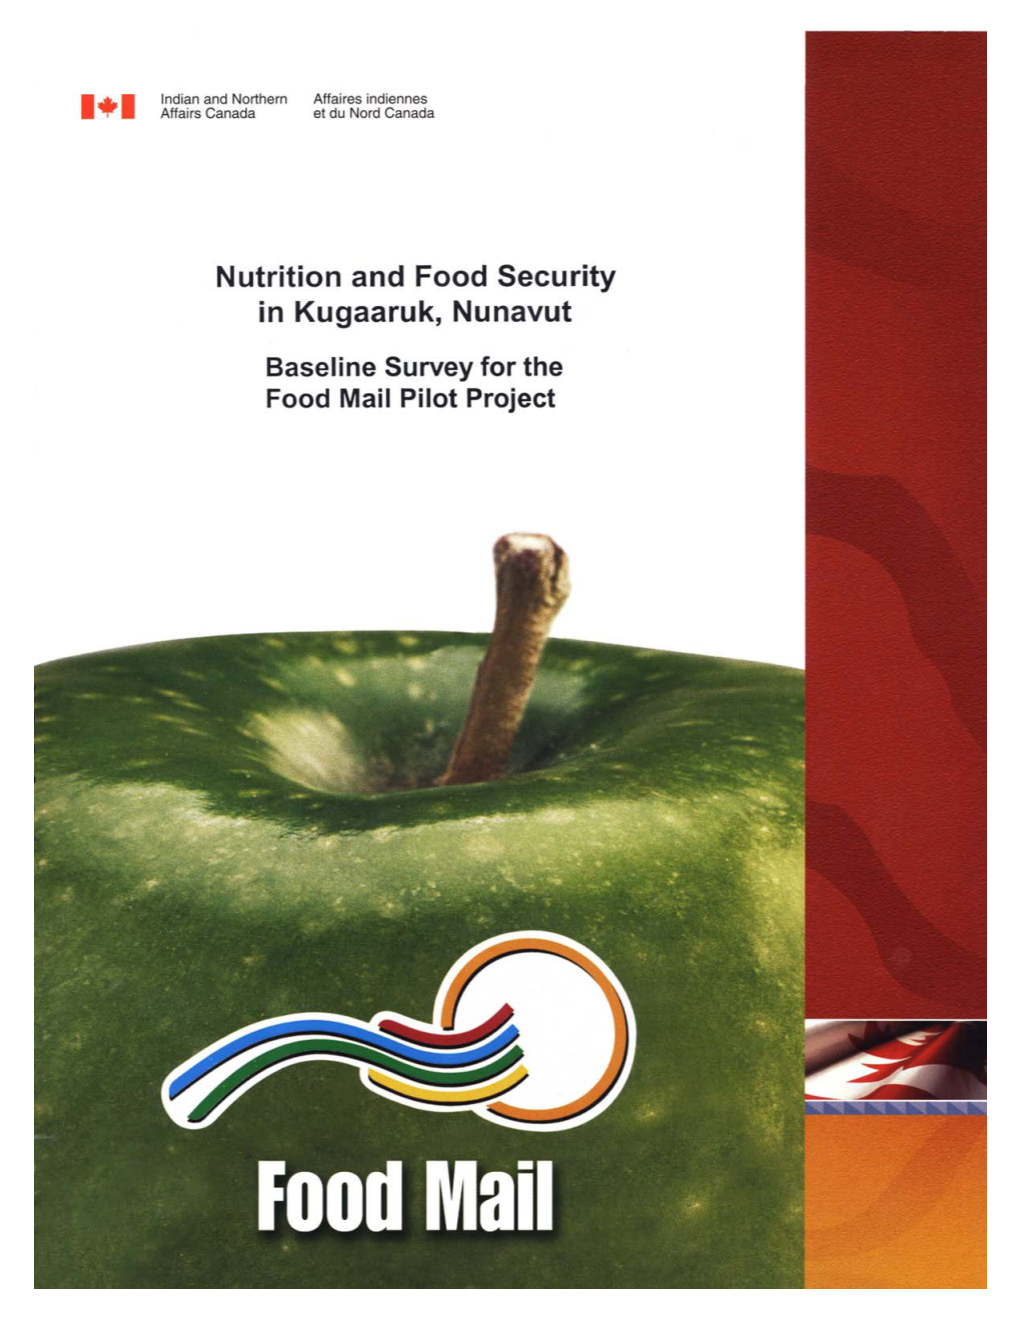 Nutrition and Food Security in Kugaaruk, Nunavut